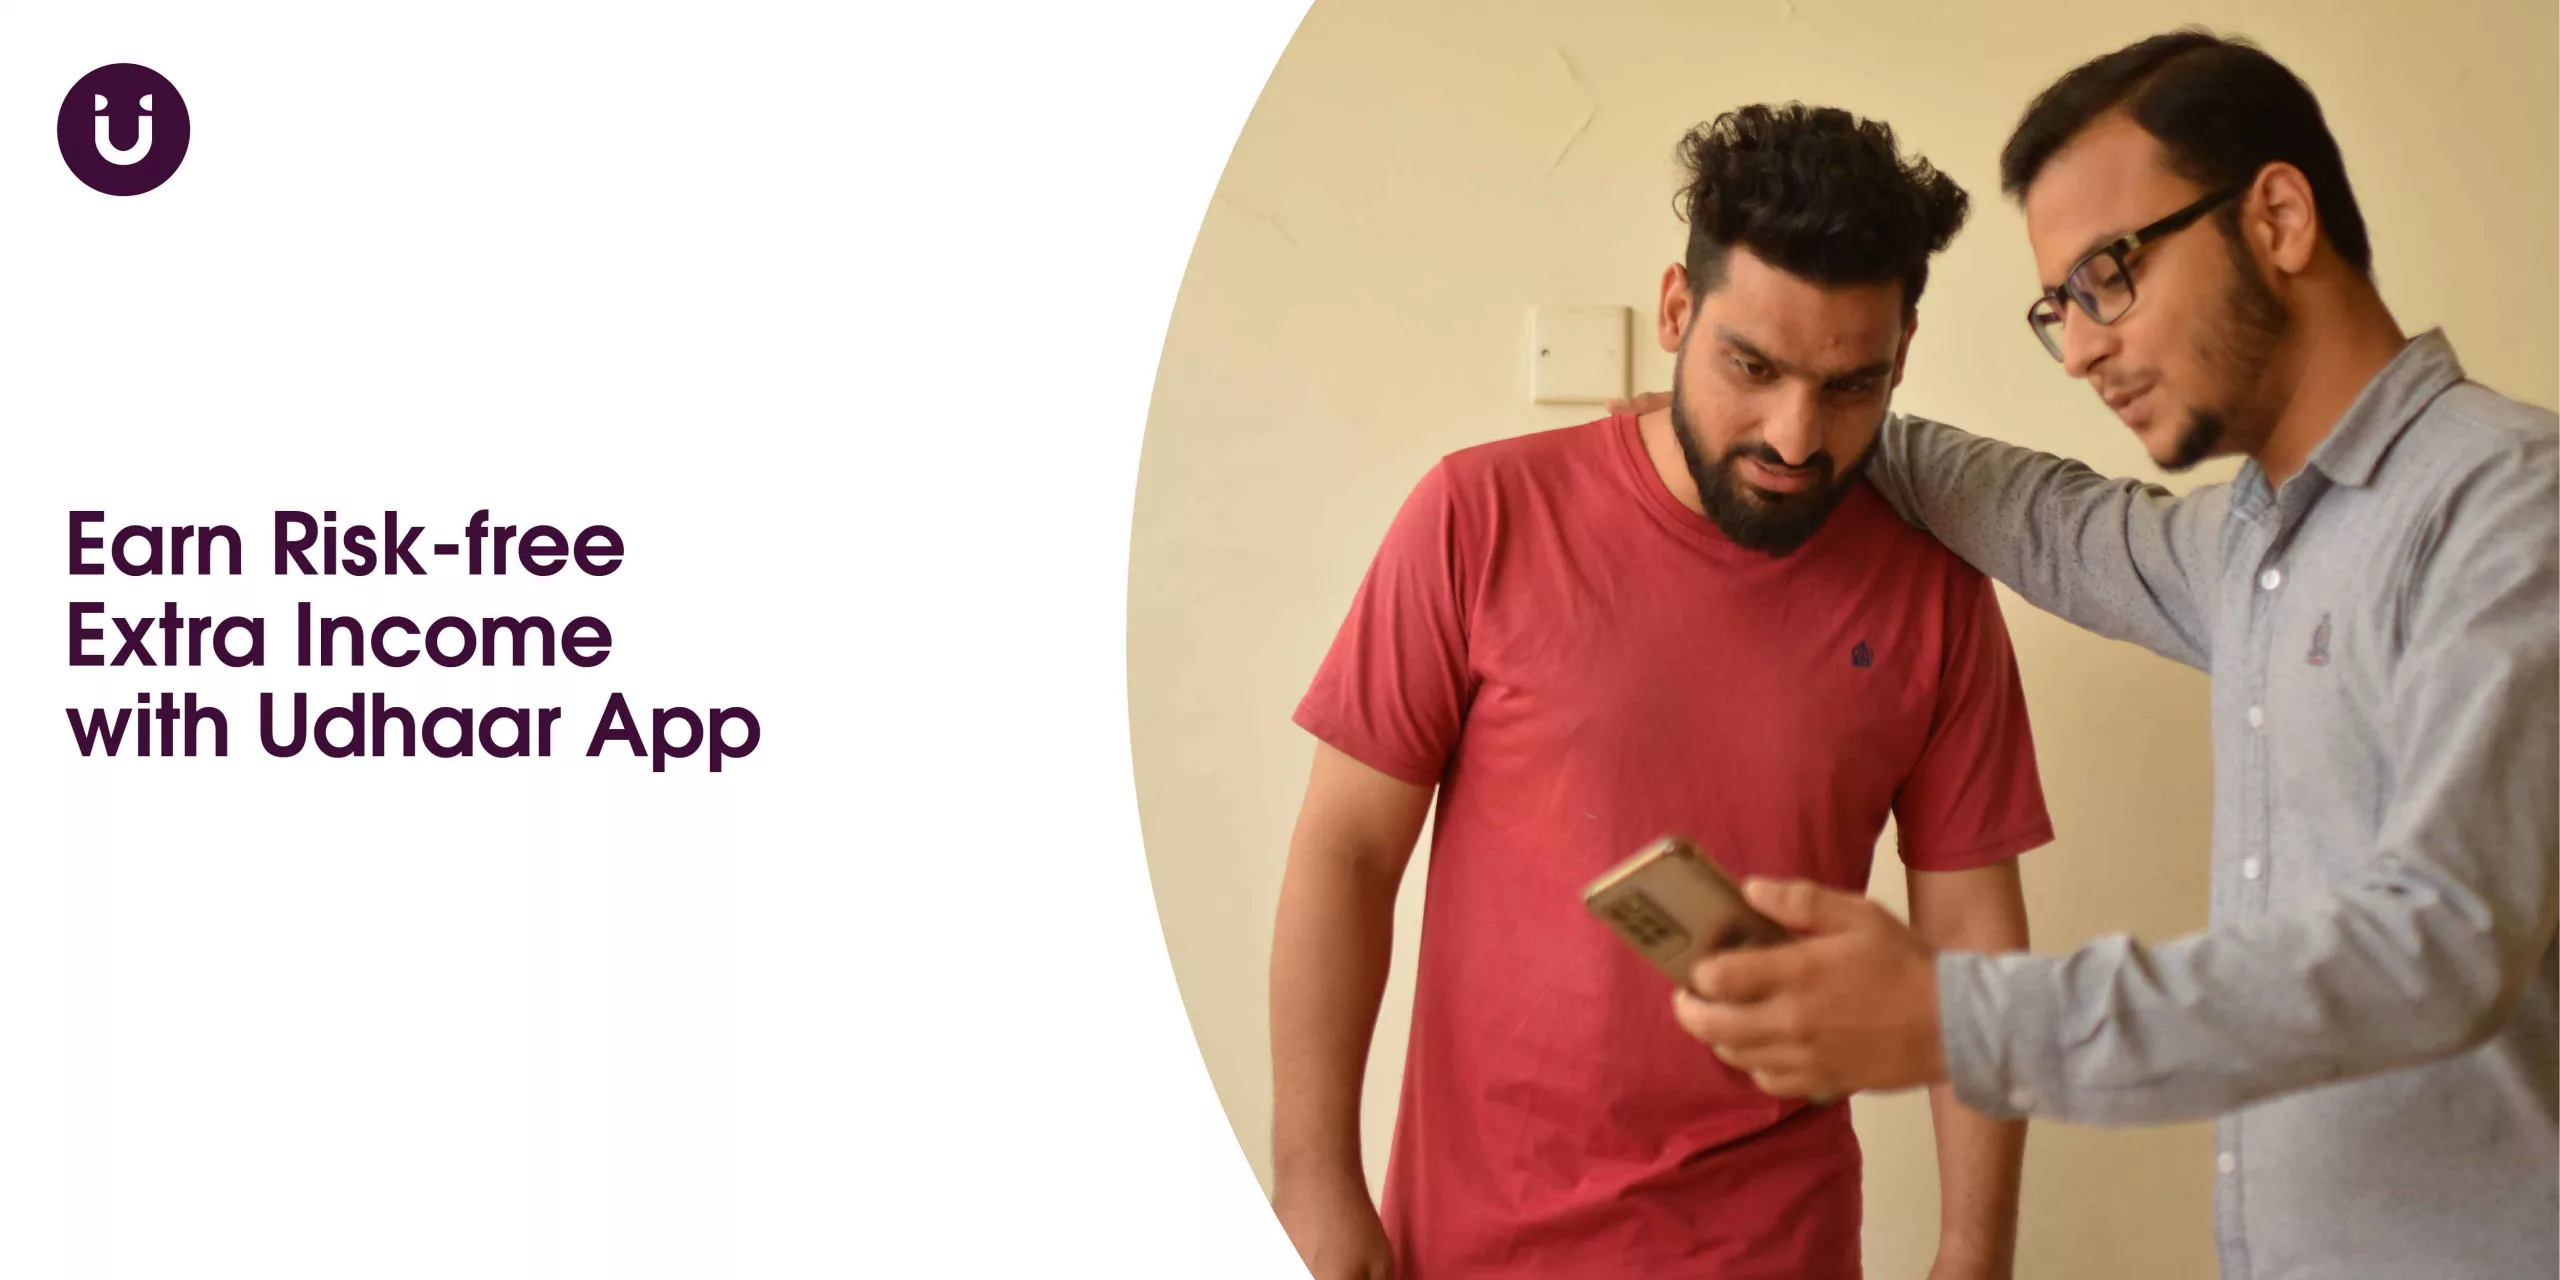 Earn Risk-free Extra Income with Udhaar App